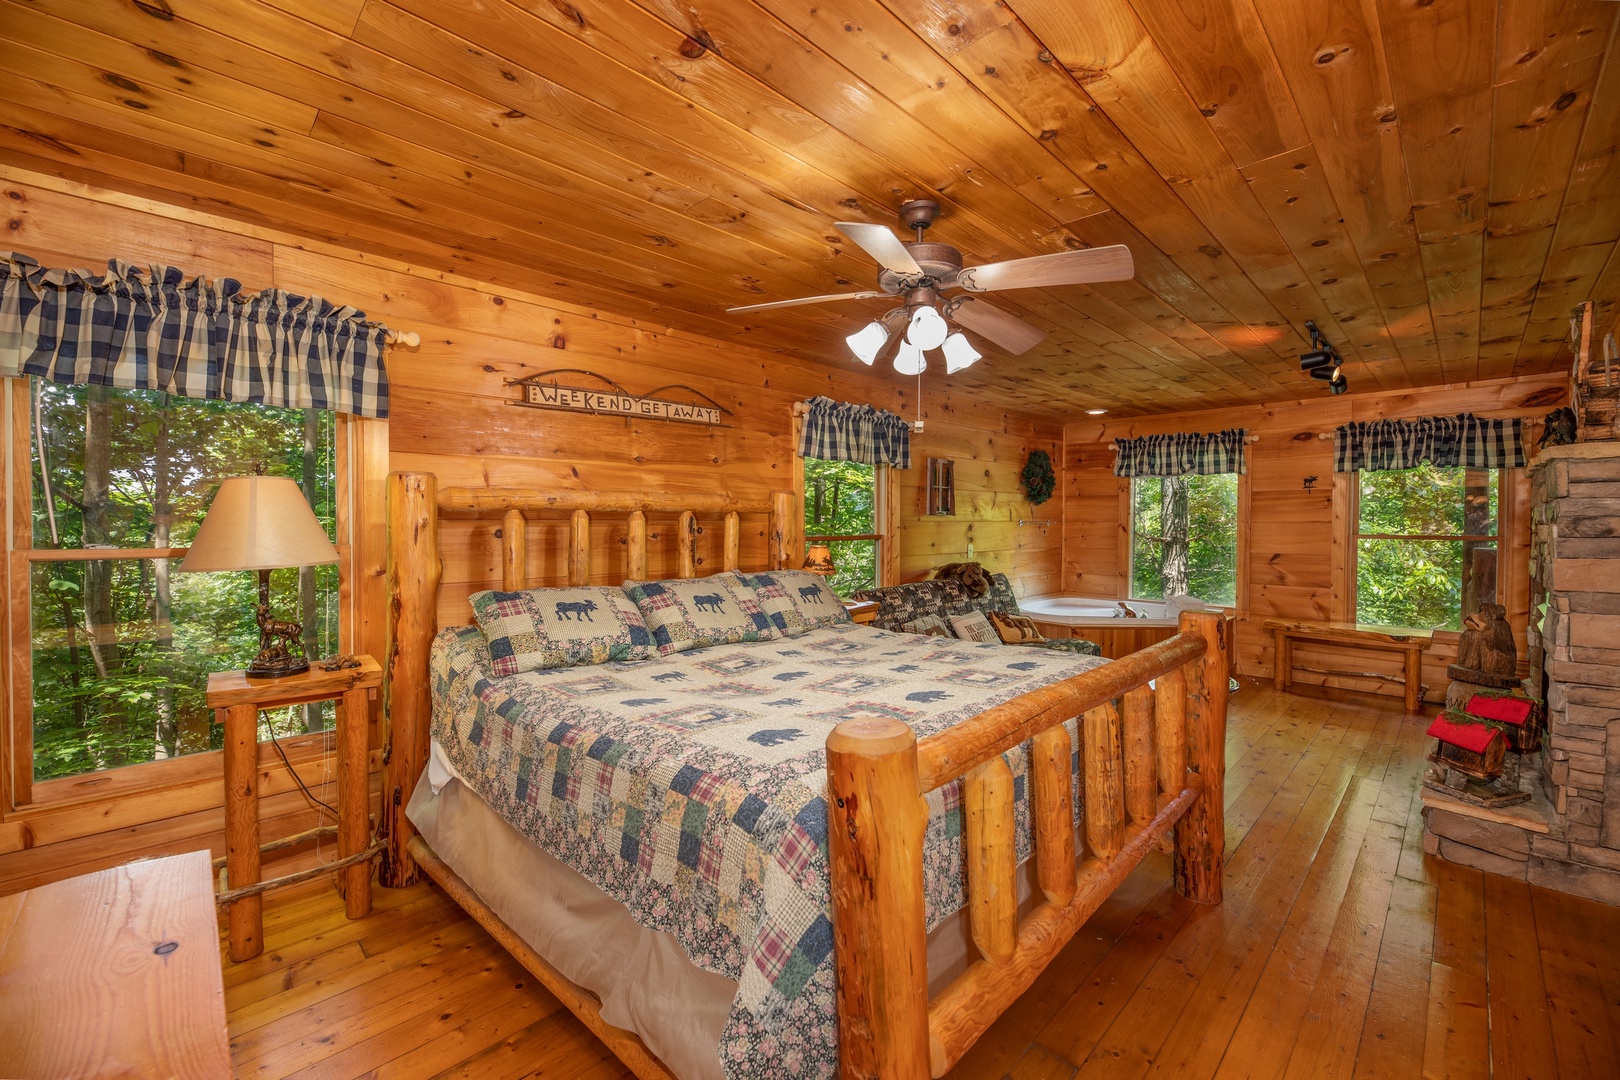 Bedroom with a king log bed at Misty Mountain Escape, a 2 bedroom cabin rental located in Gatlinburg